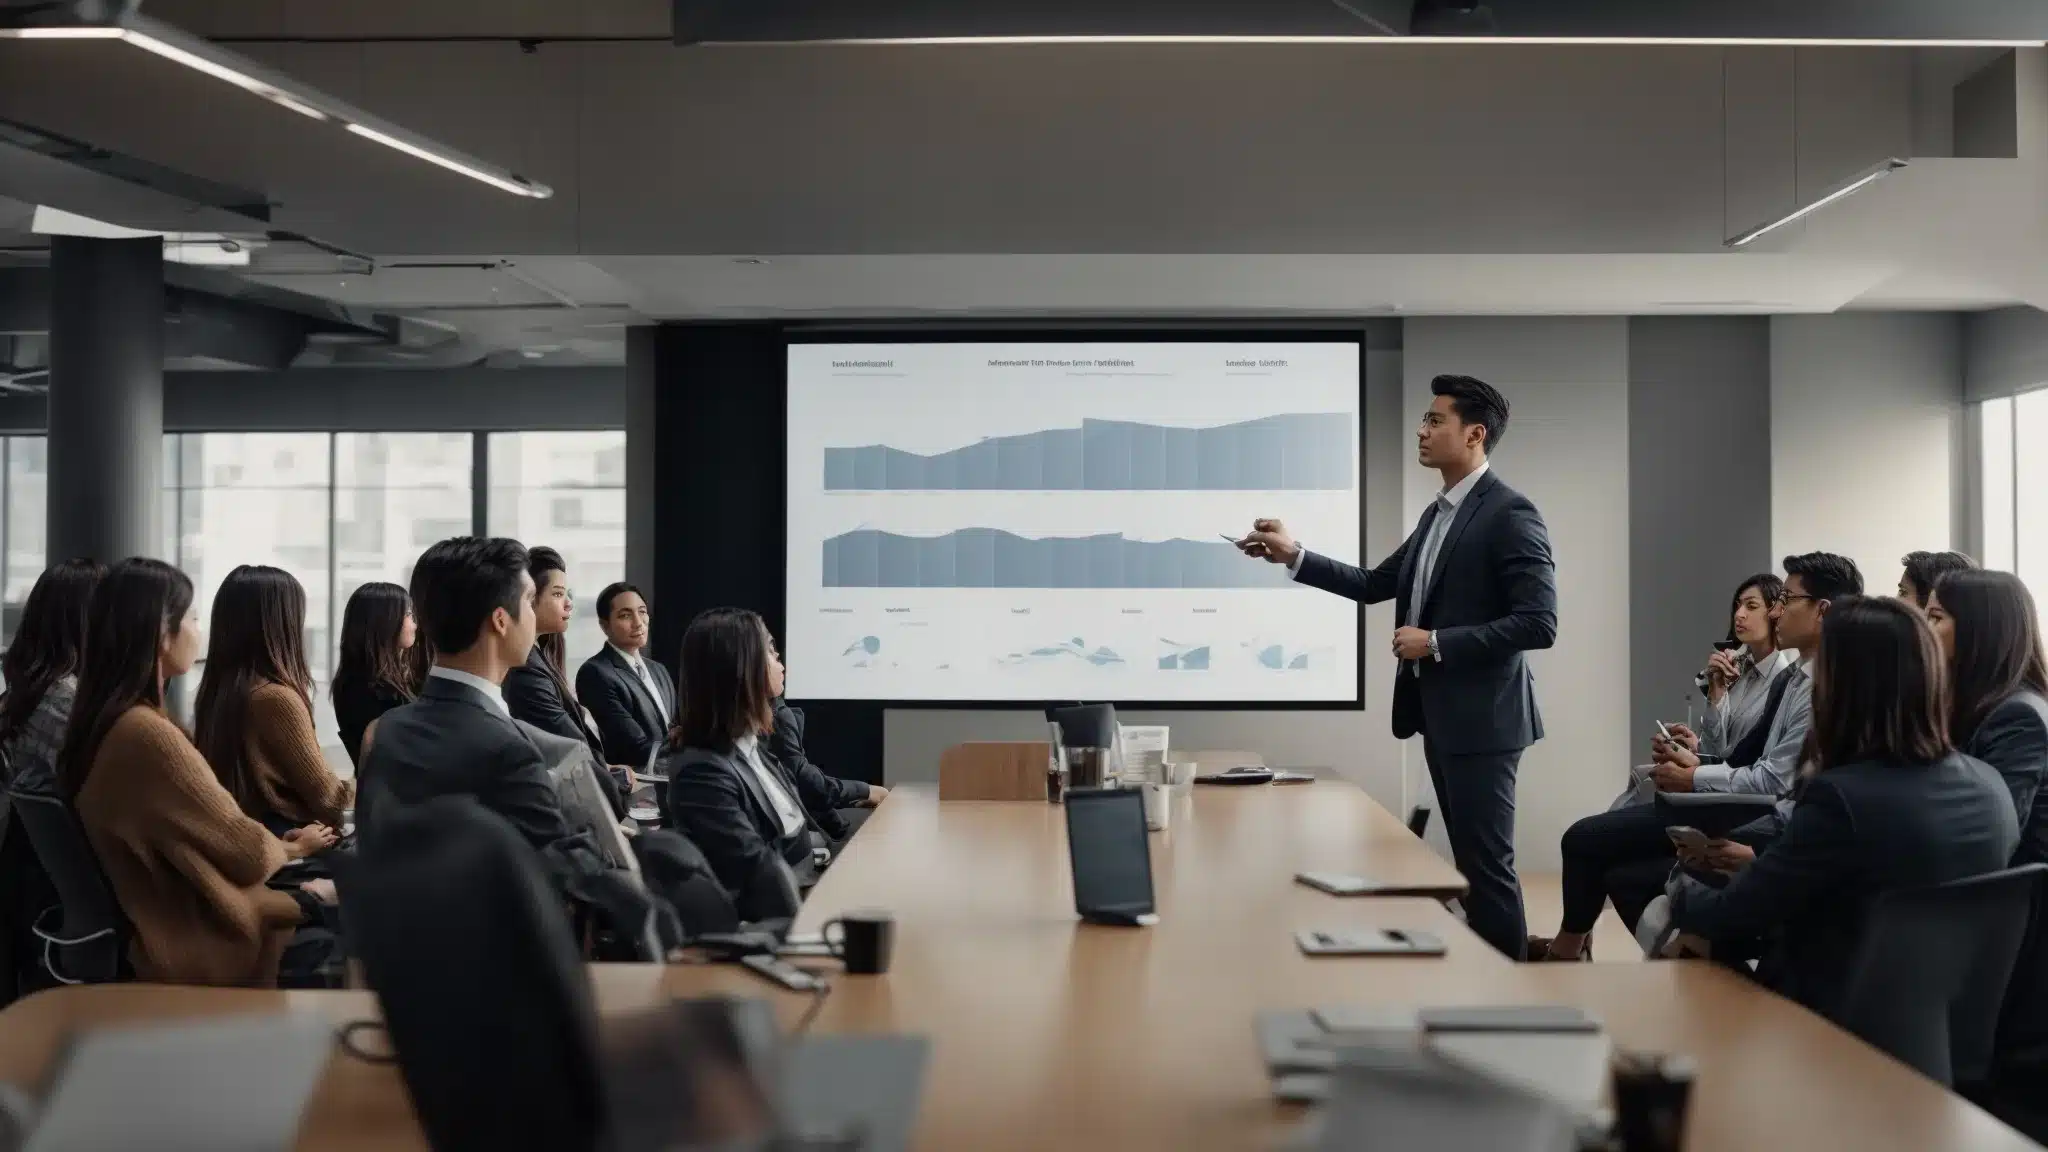 A Marketer Presenting A Comprehensive Digital Strategy On A Large Screen To A Group Of Engaged Professionals In A Modern Office Setting.